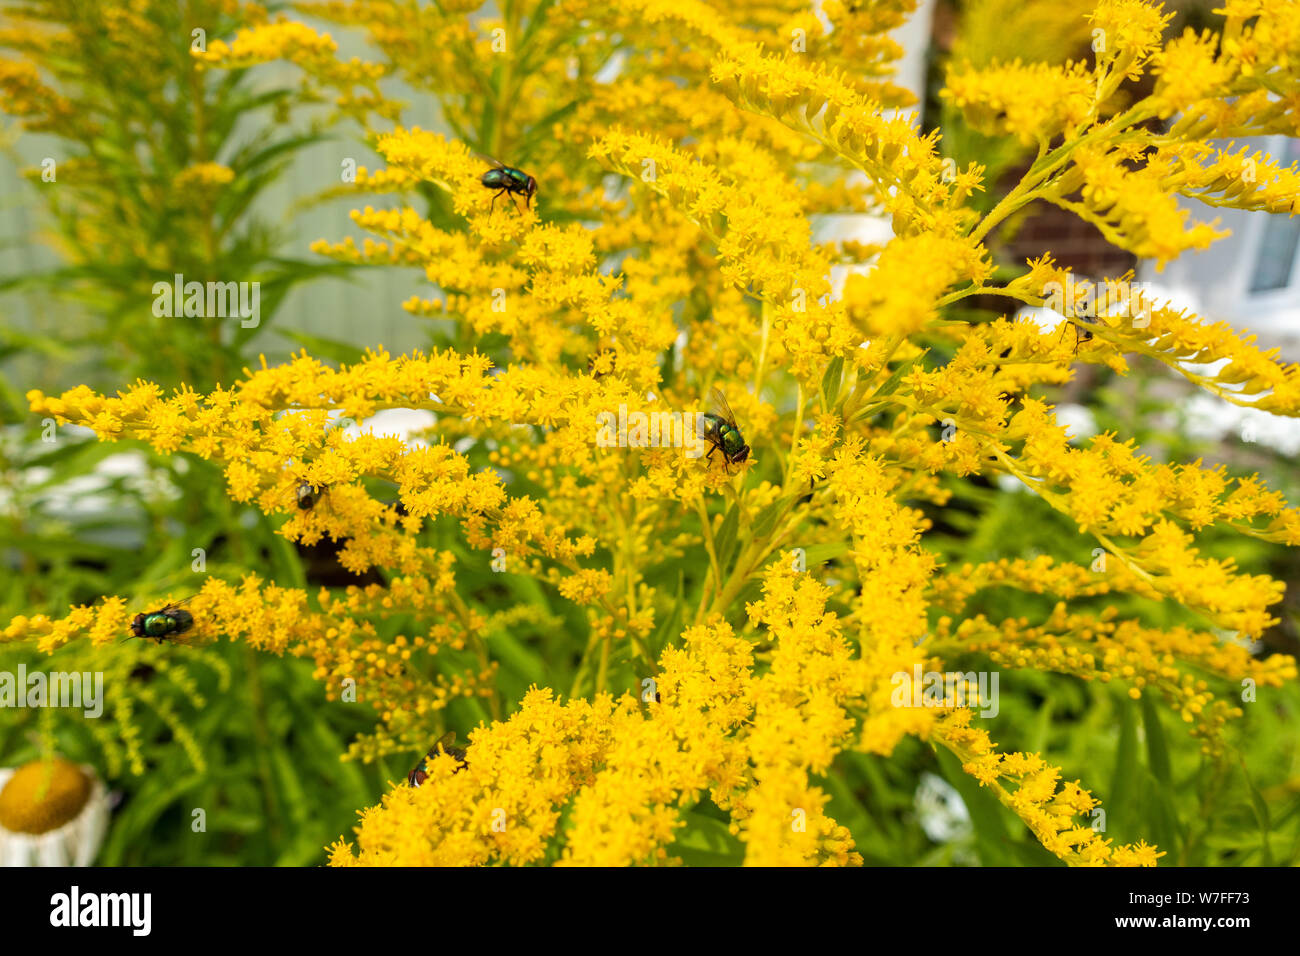 Goldenrod or Solidago flowers with green bottle flies visiting. Stock Photo